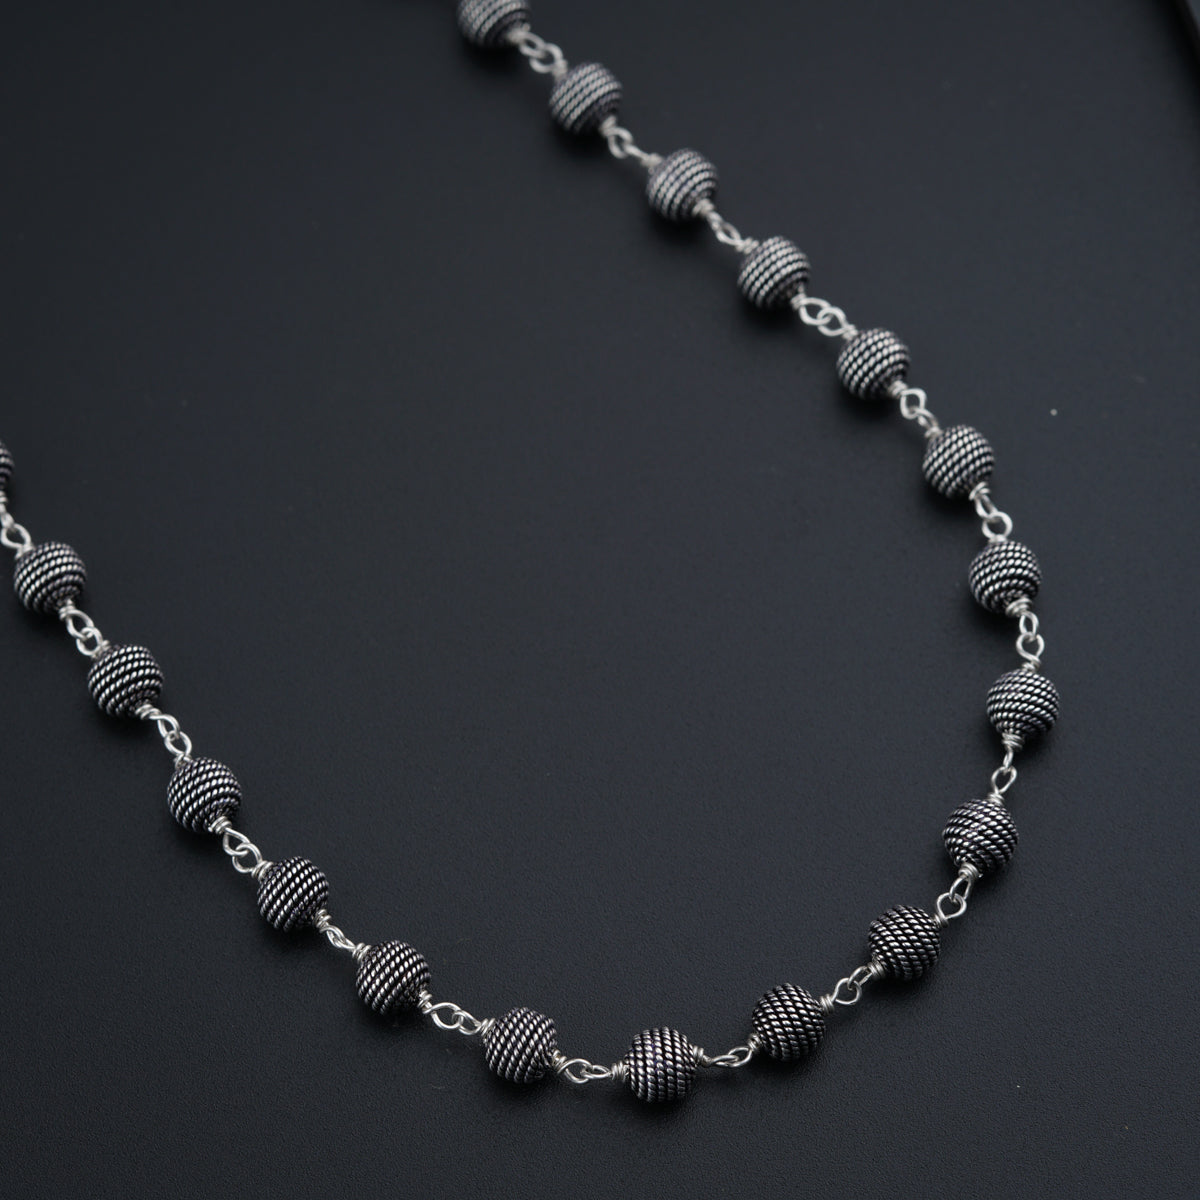 a silver necklace with a knot on a black surface